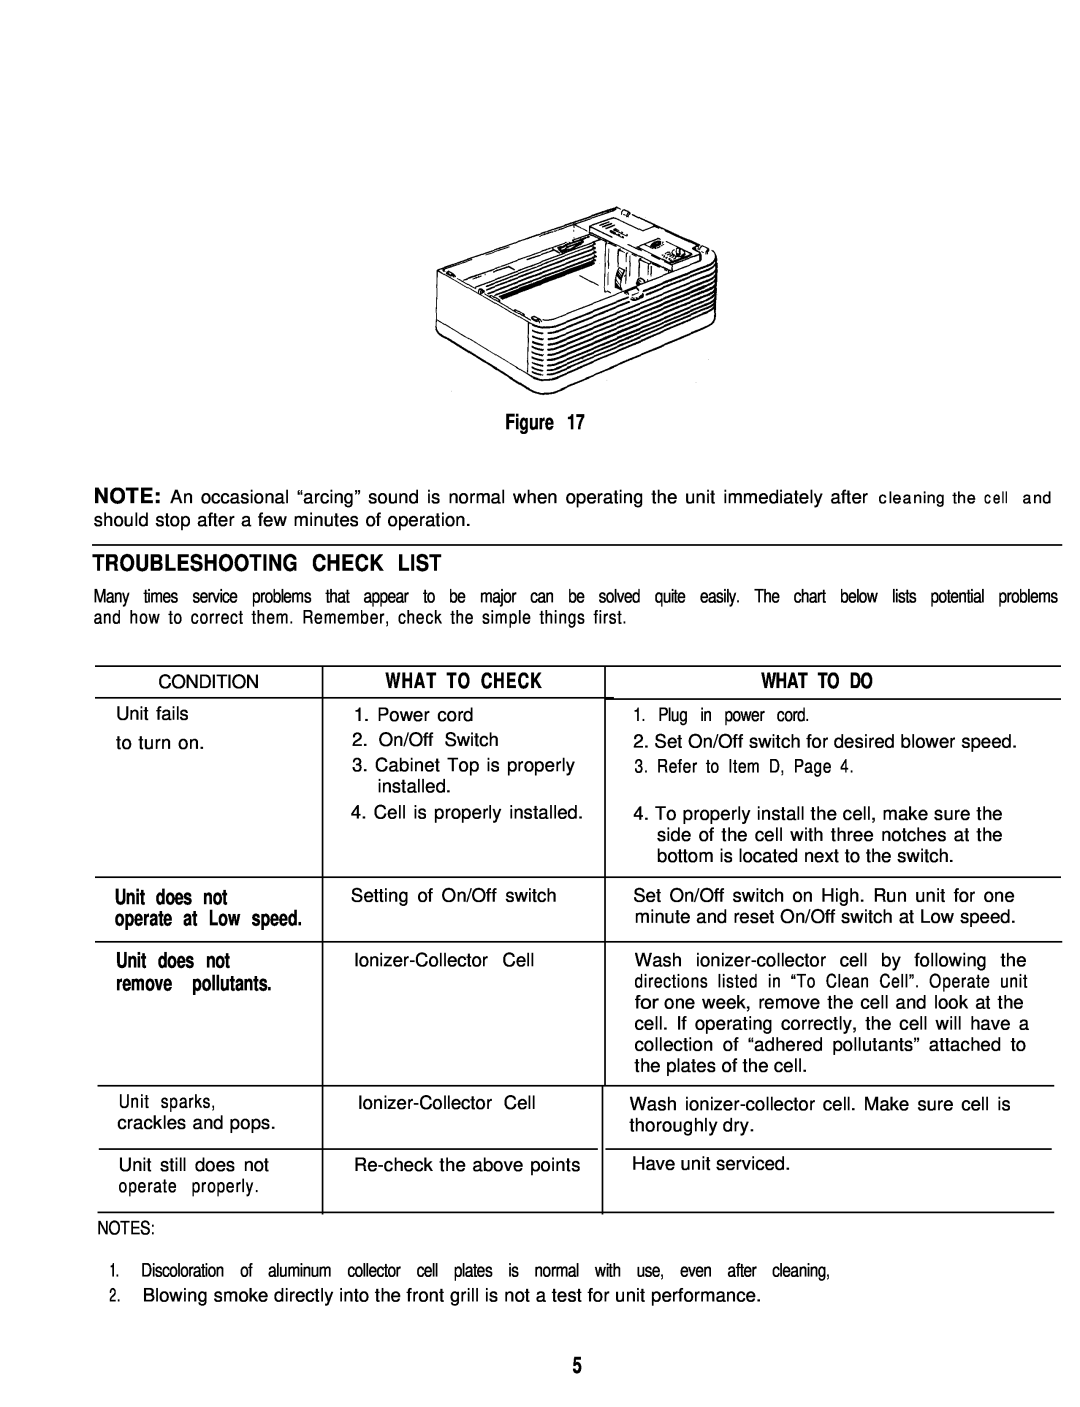 Sunbeam 2585 manual What To Check, What To Do, Troubleshooting Check List 